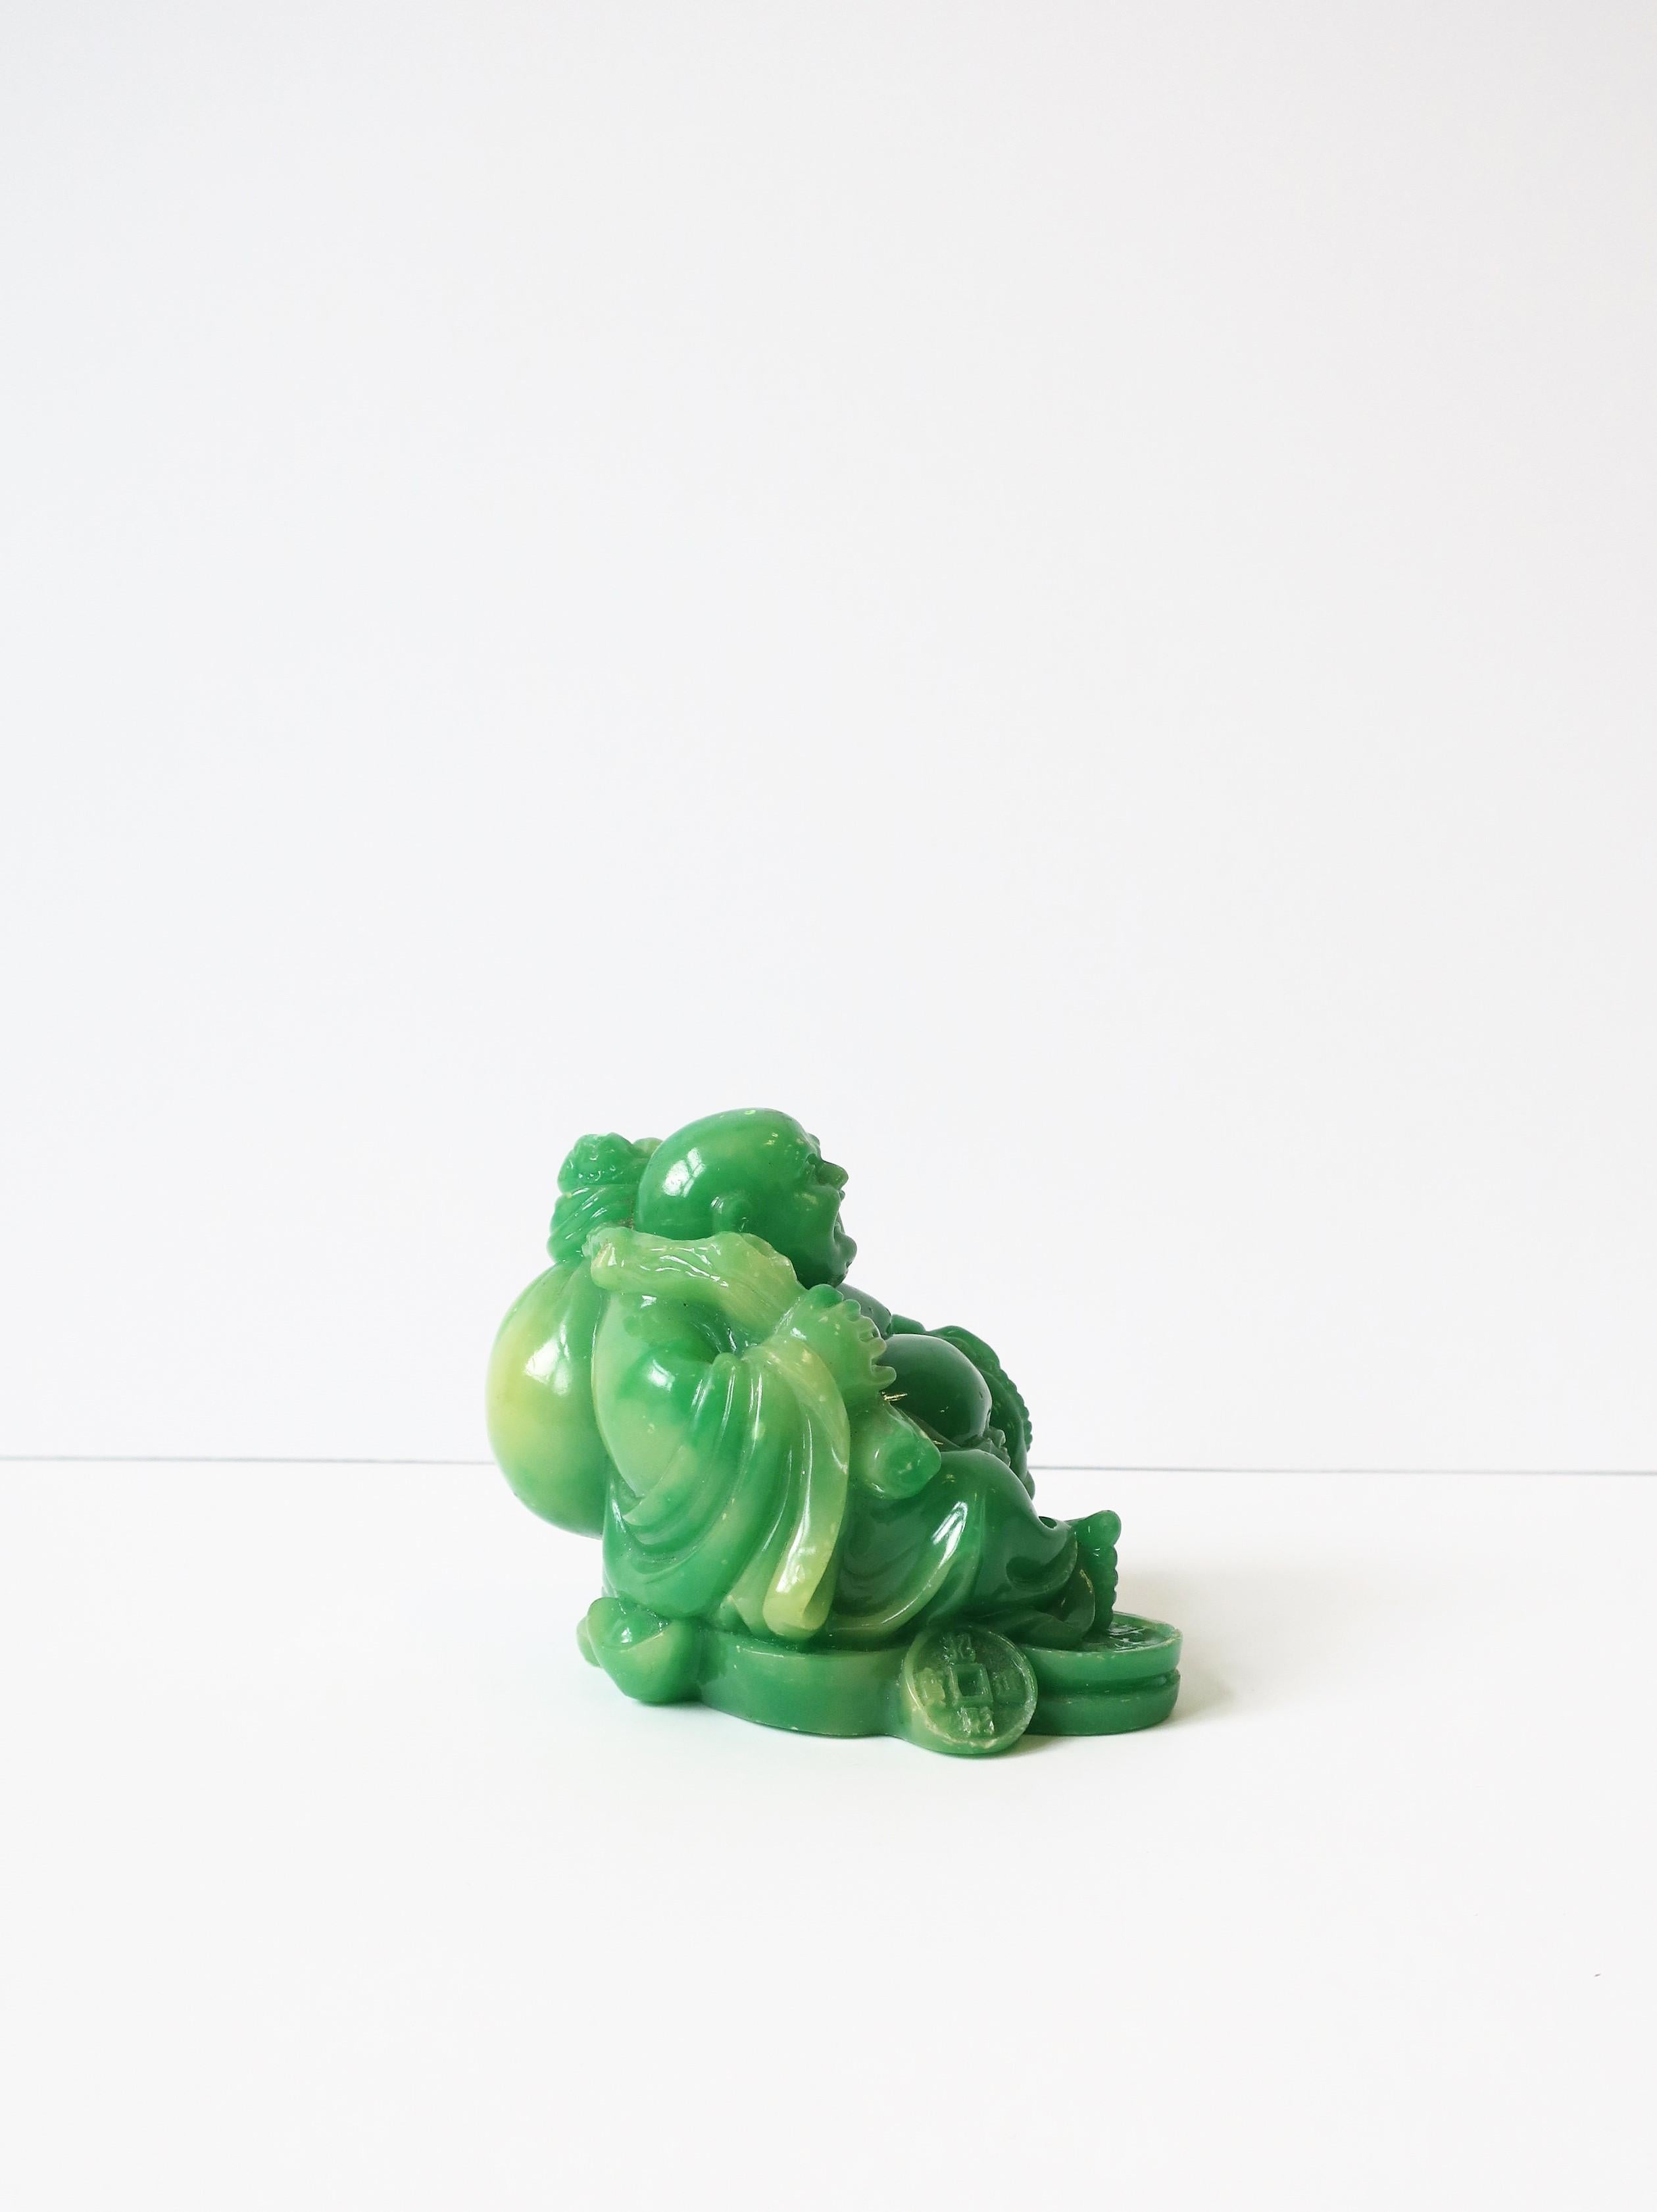 20th Century Jade Green Resin Seated Buddha Sculpture For Sale